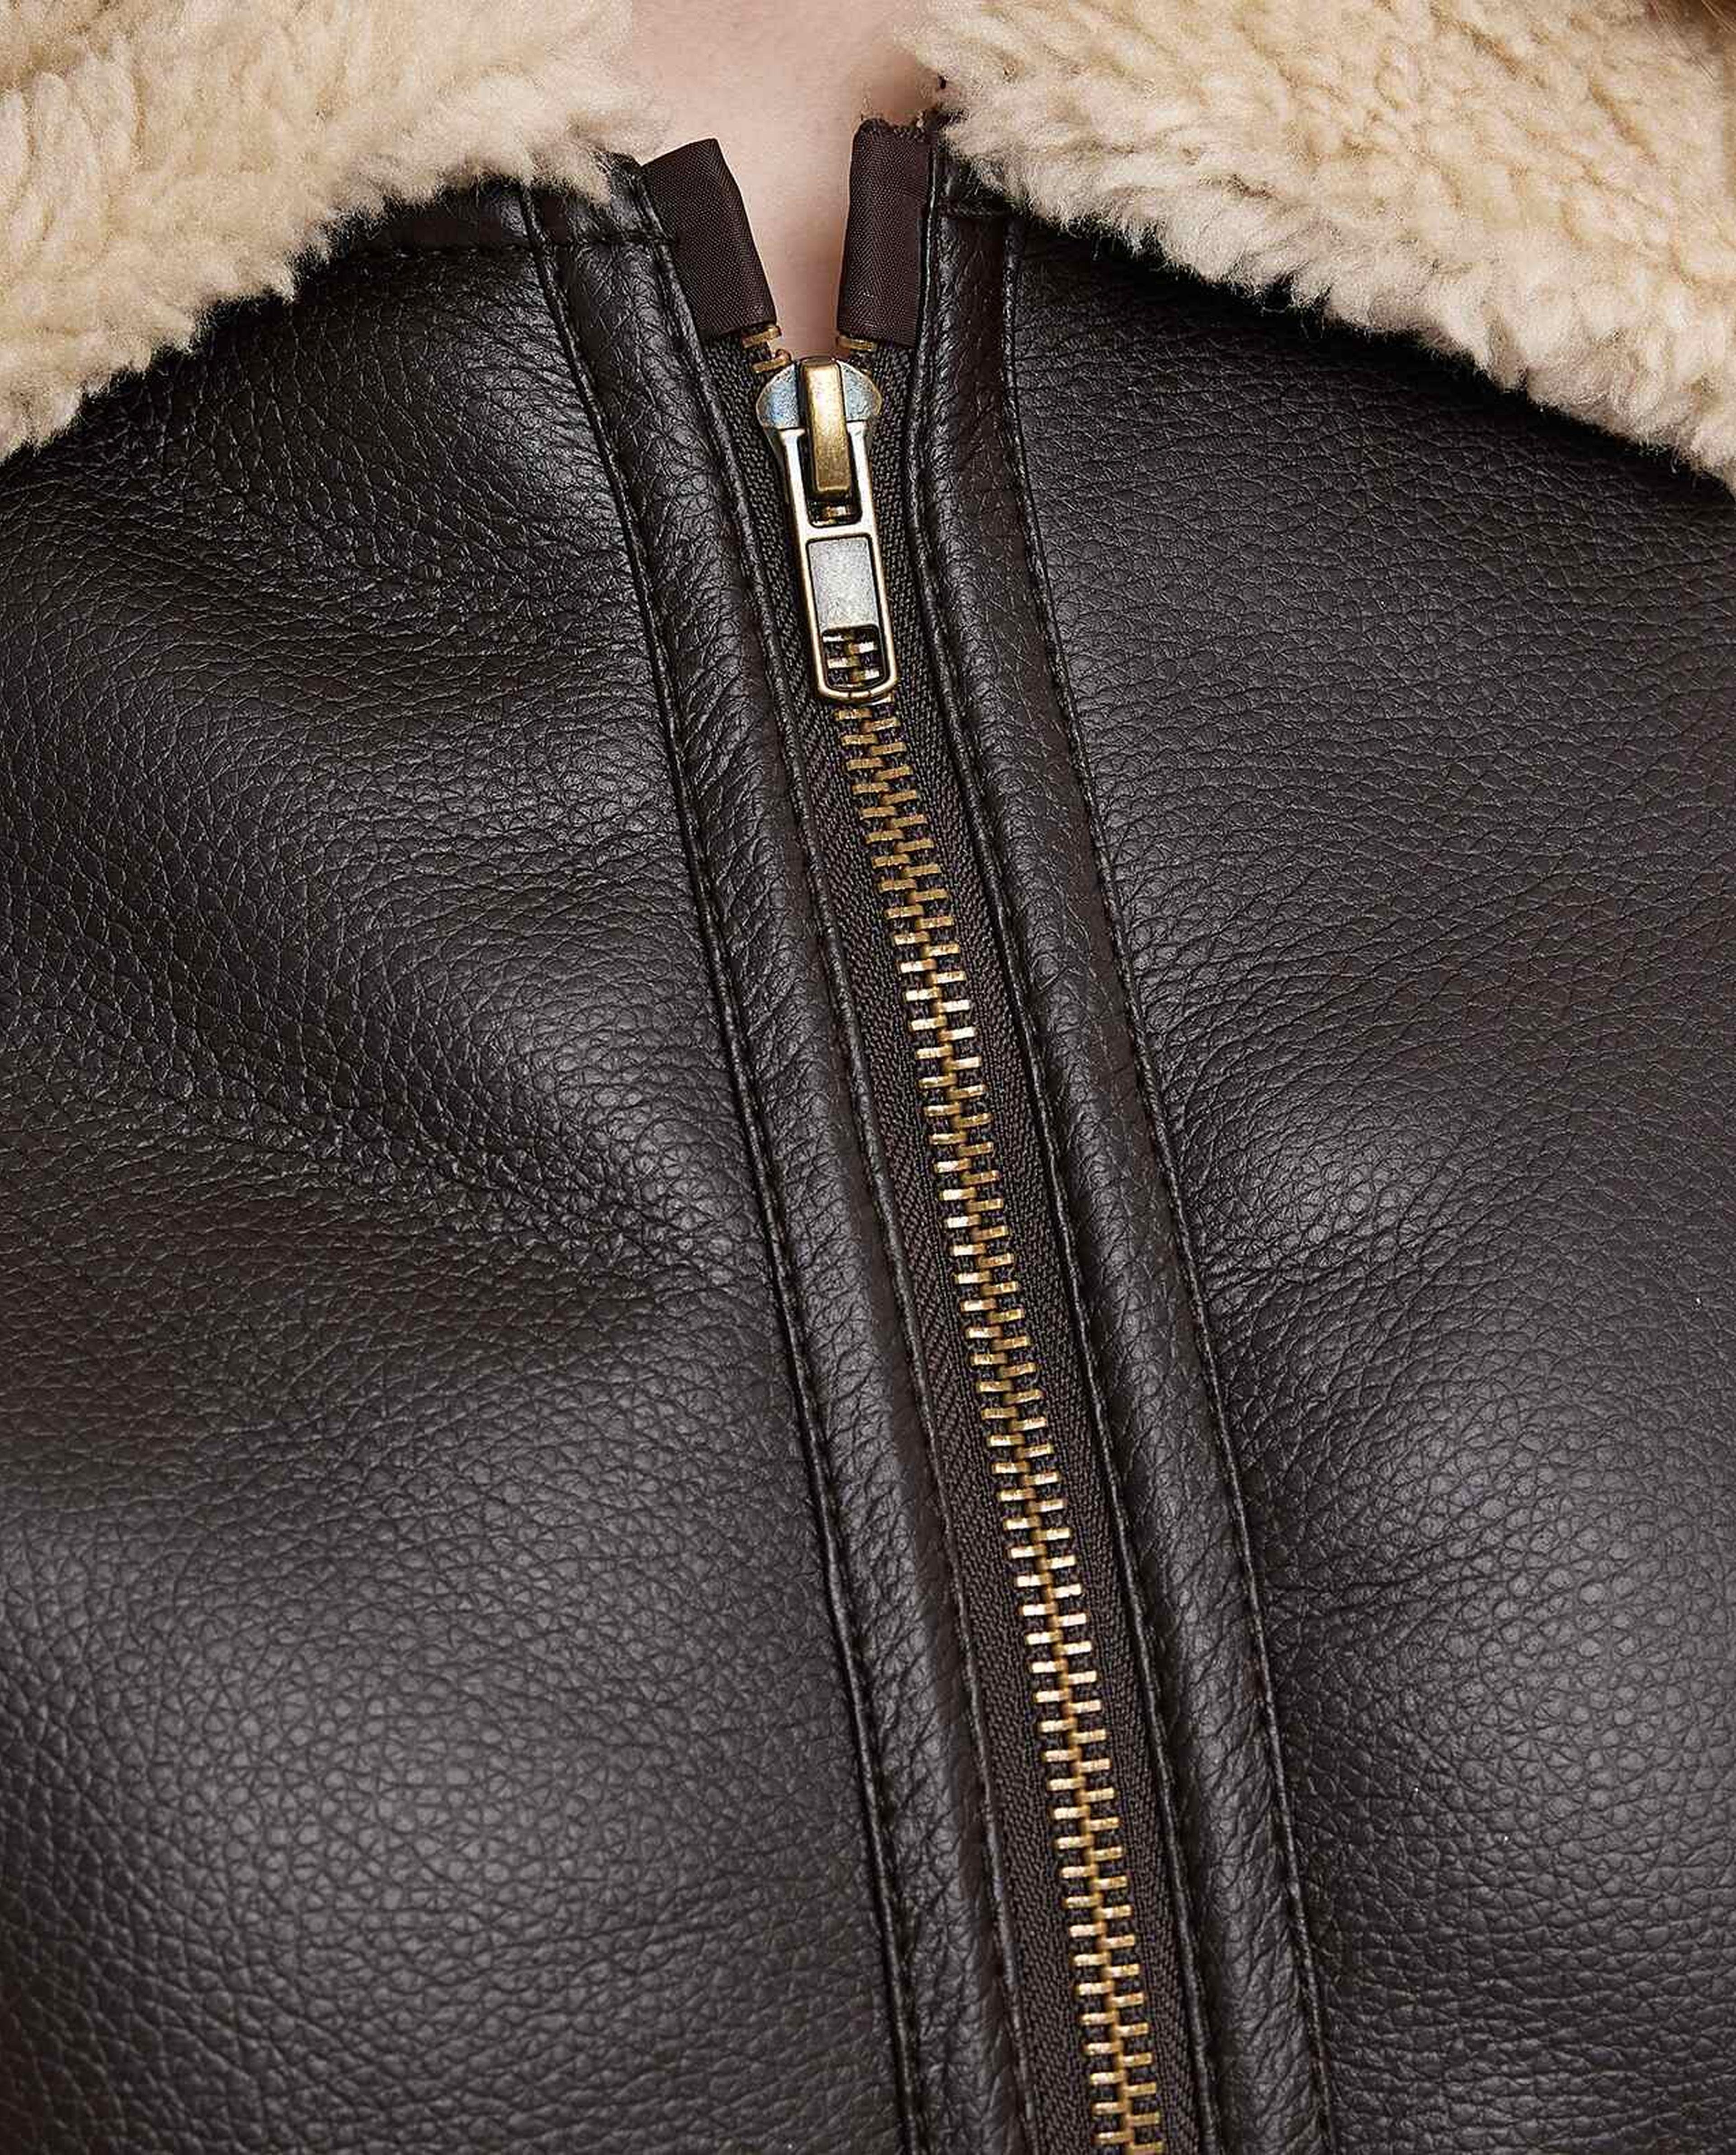 Sherpa Detail Jacket with Zipper Closure